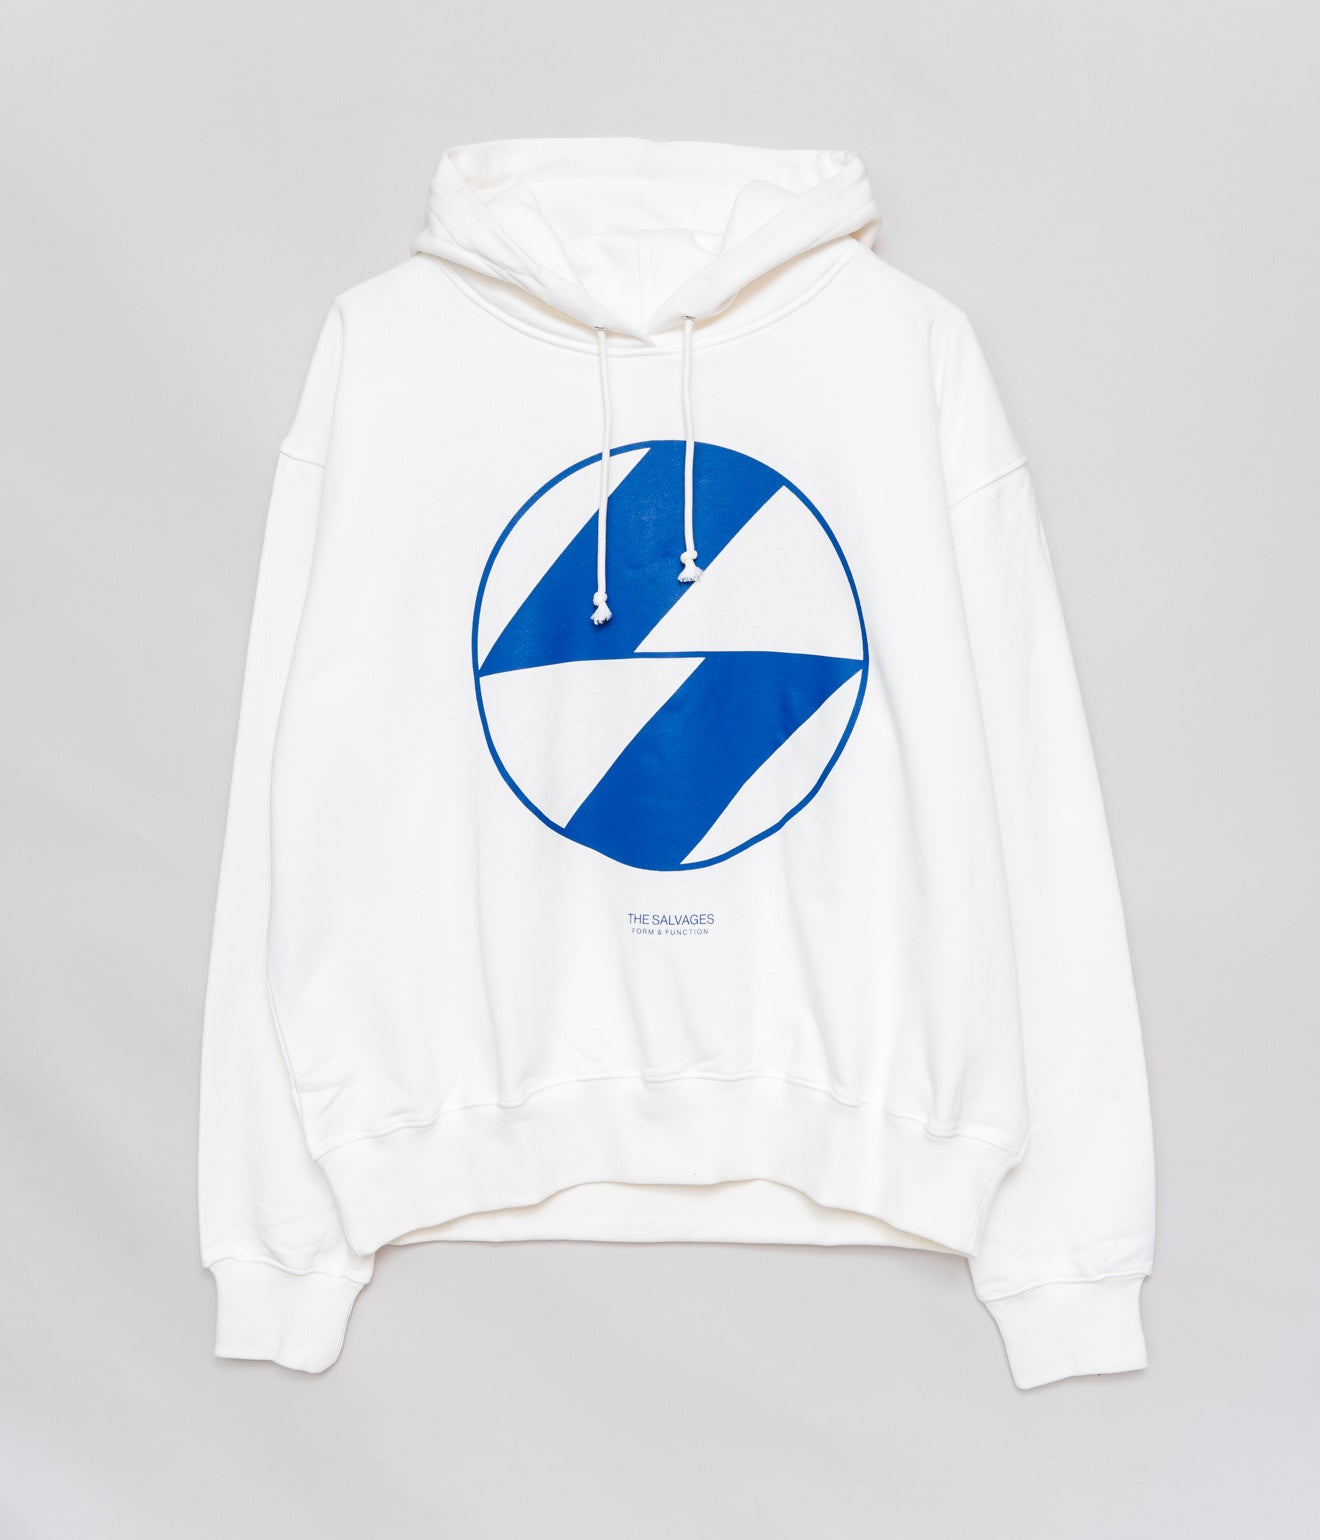 THE SALVAGES "Emblem Os Hoodie" White - WEAREALLANIMALS